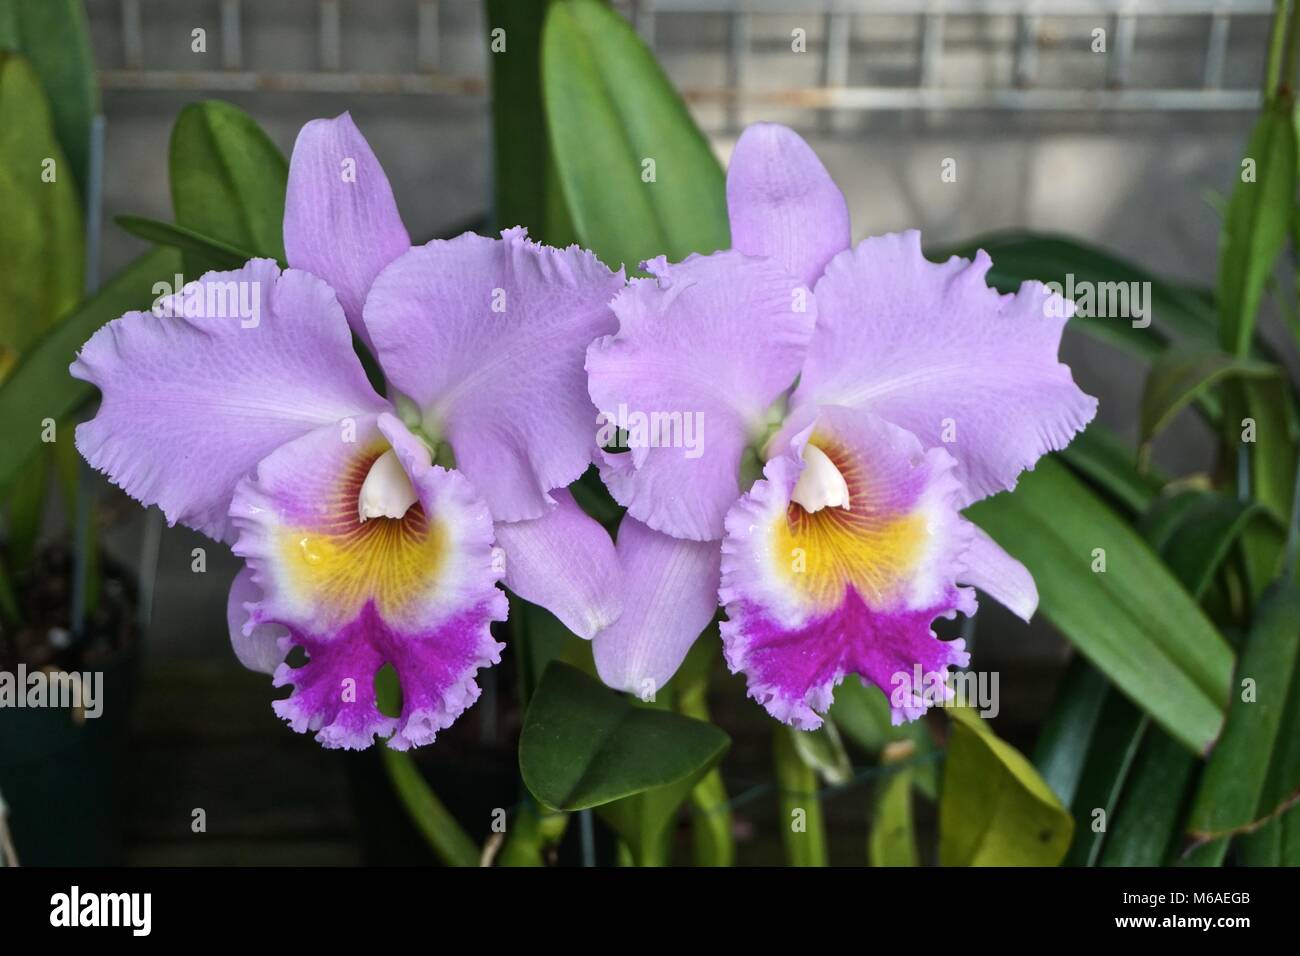 Cattleya Orchids. Multicolor orchids of pink, yellow, and purple. Stock Photo